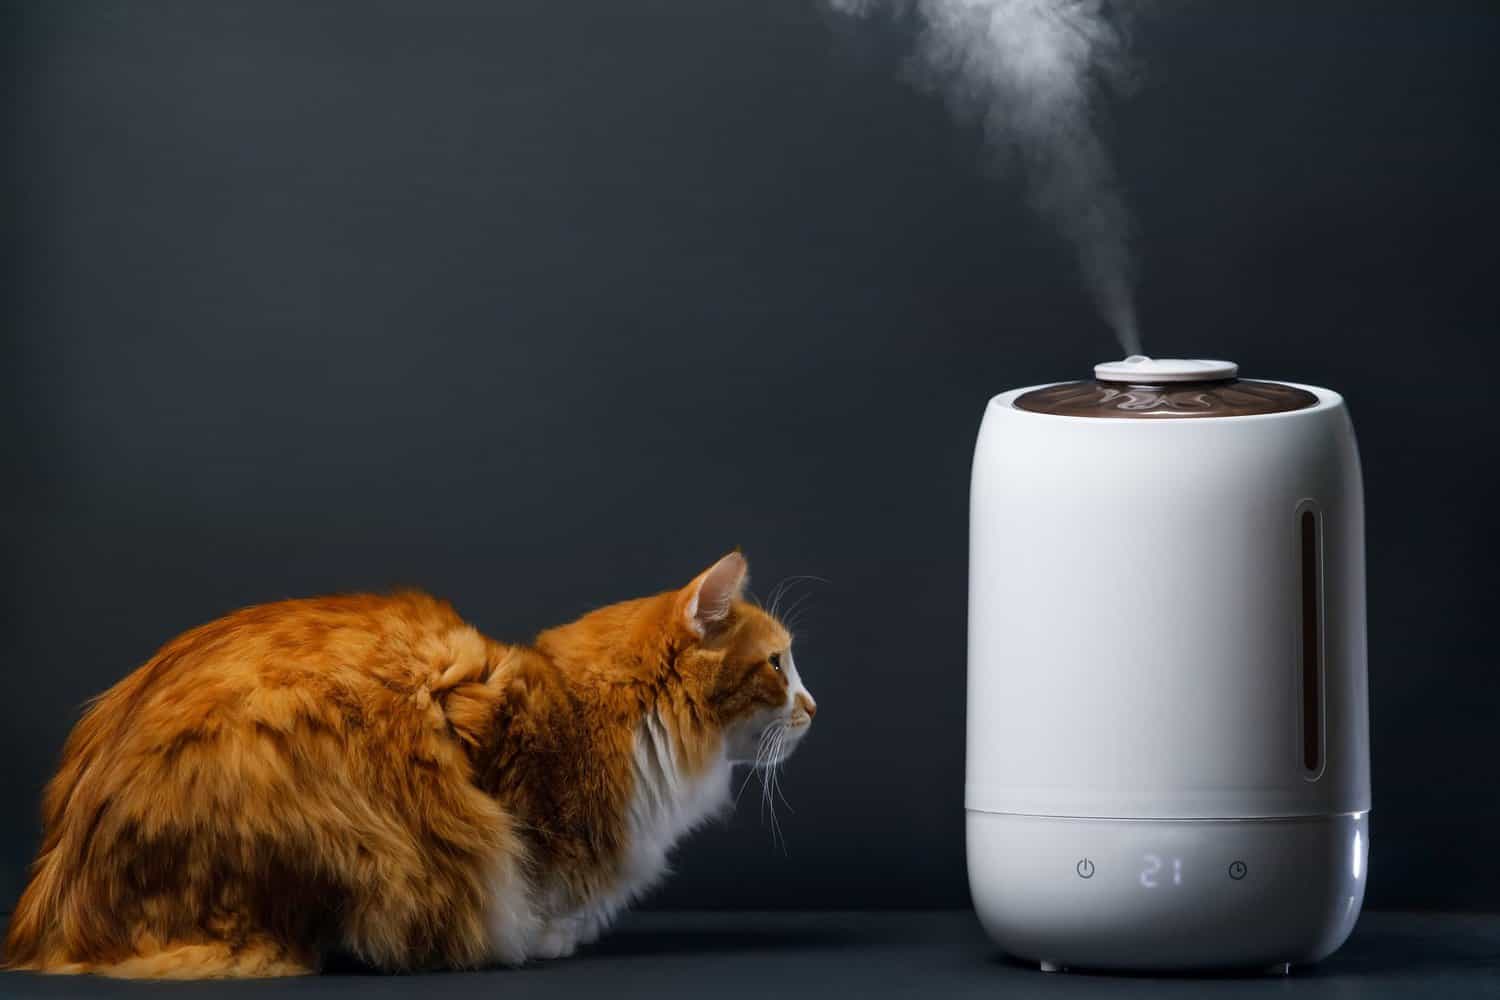 Best Humidifier For Cats- Our Top 5 Picks